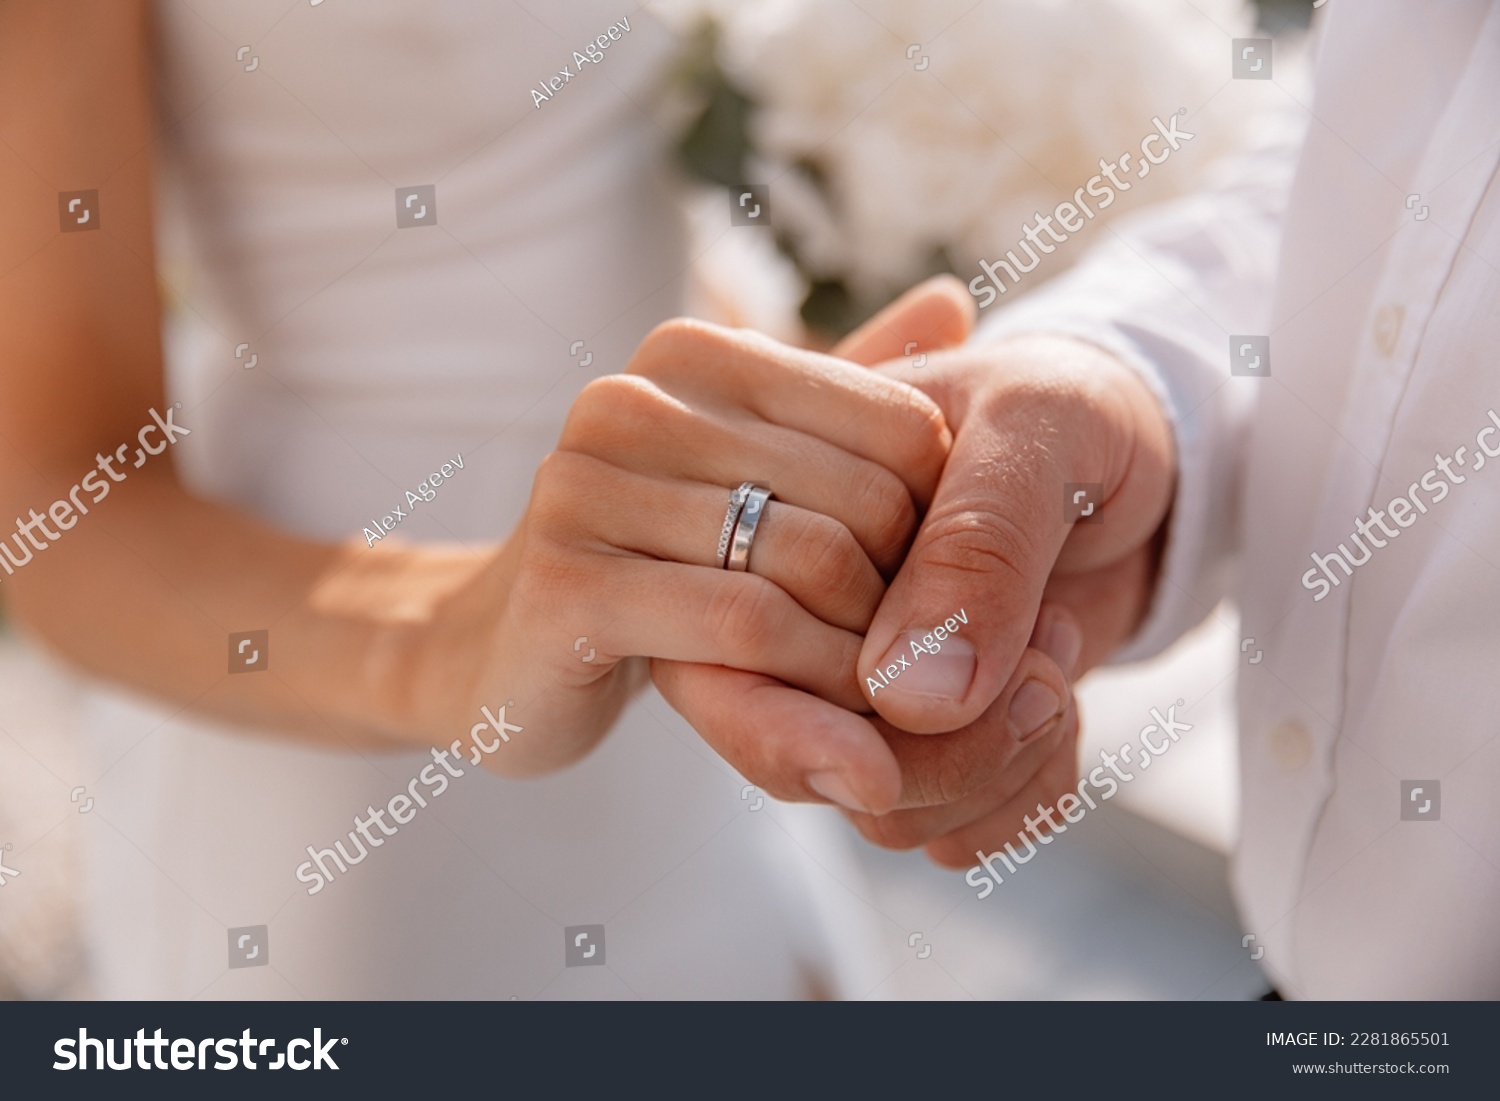 Close-up photo of the men`s holding woman hand with golden wedding ring with diamond. Wedding ring before the proposal. Luxury wedding rings #2281865501